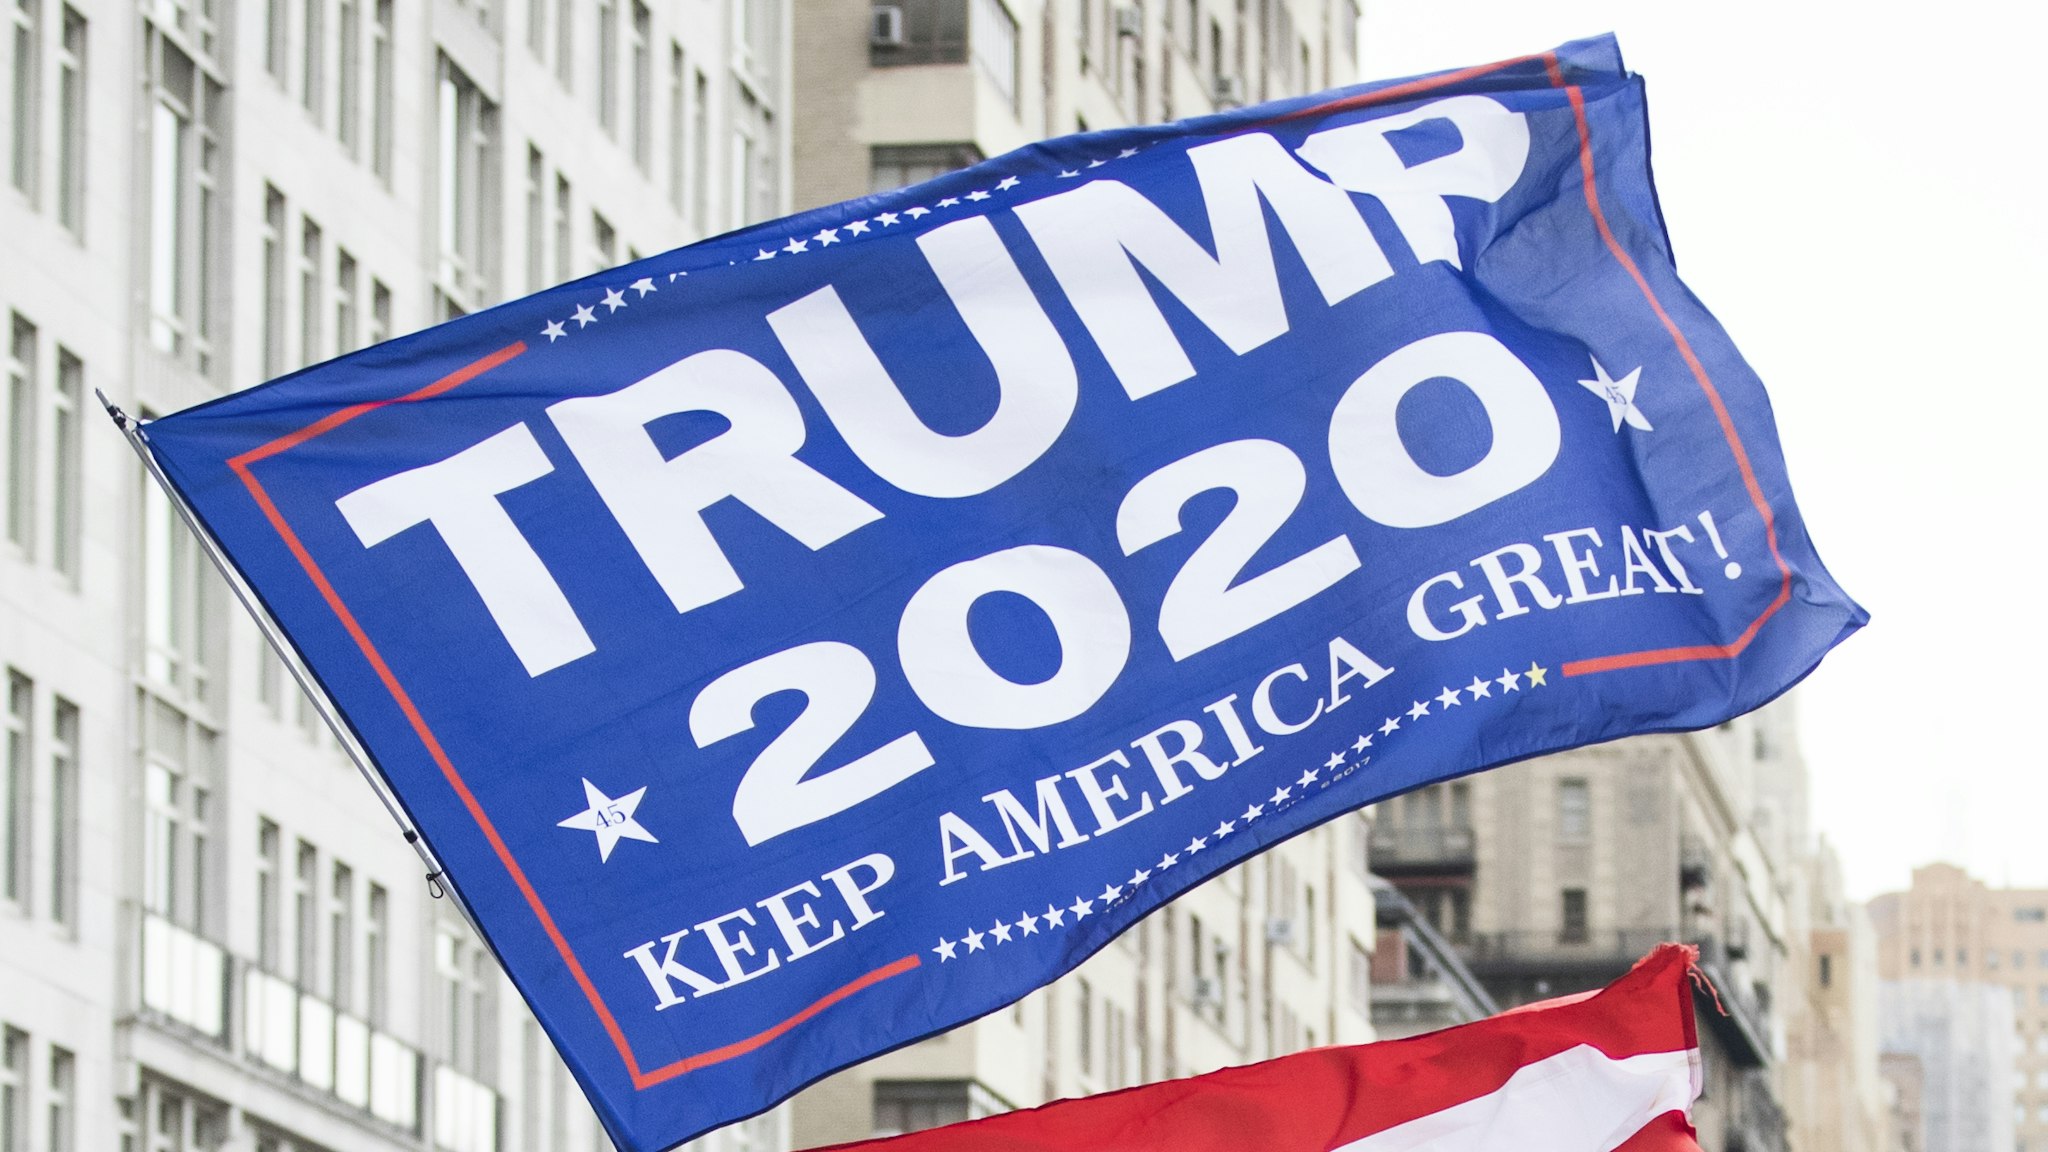 MANHATTAN, NY - JANUARY 18: A Trump supporter waves a huge flag with TRUMP 2020 Keep America Great! walks in front of the marchers as they start the march on Central Park West during the Woman's March in the borough of Manhattan in NY on January 18, 2020, USA. The rally took place 3 years after the inauguration of President Donald Trump and 3 days after the Articles of Impeachment were brought to the Senate. Thousands gather to protest equal rights at the 2020 Women's March.